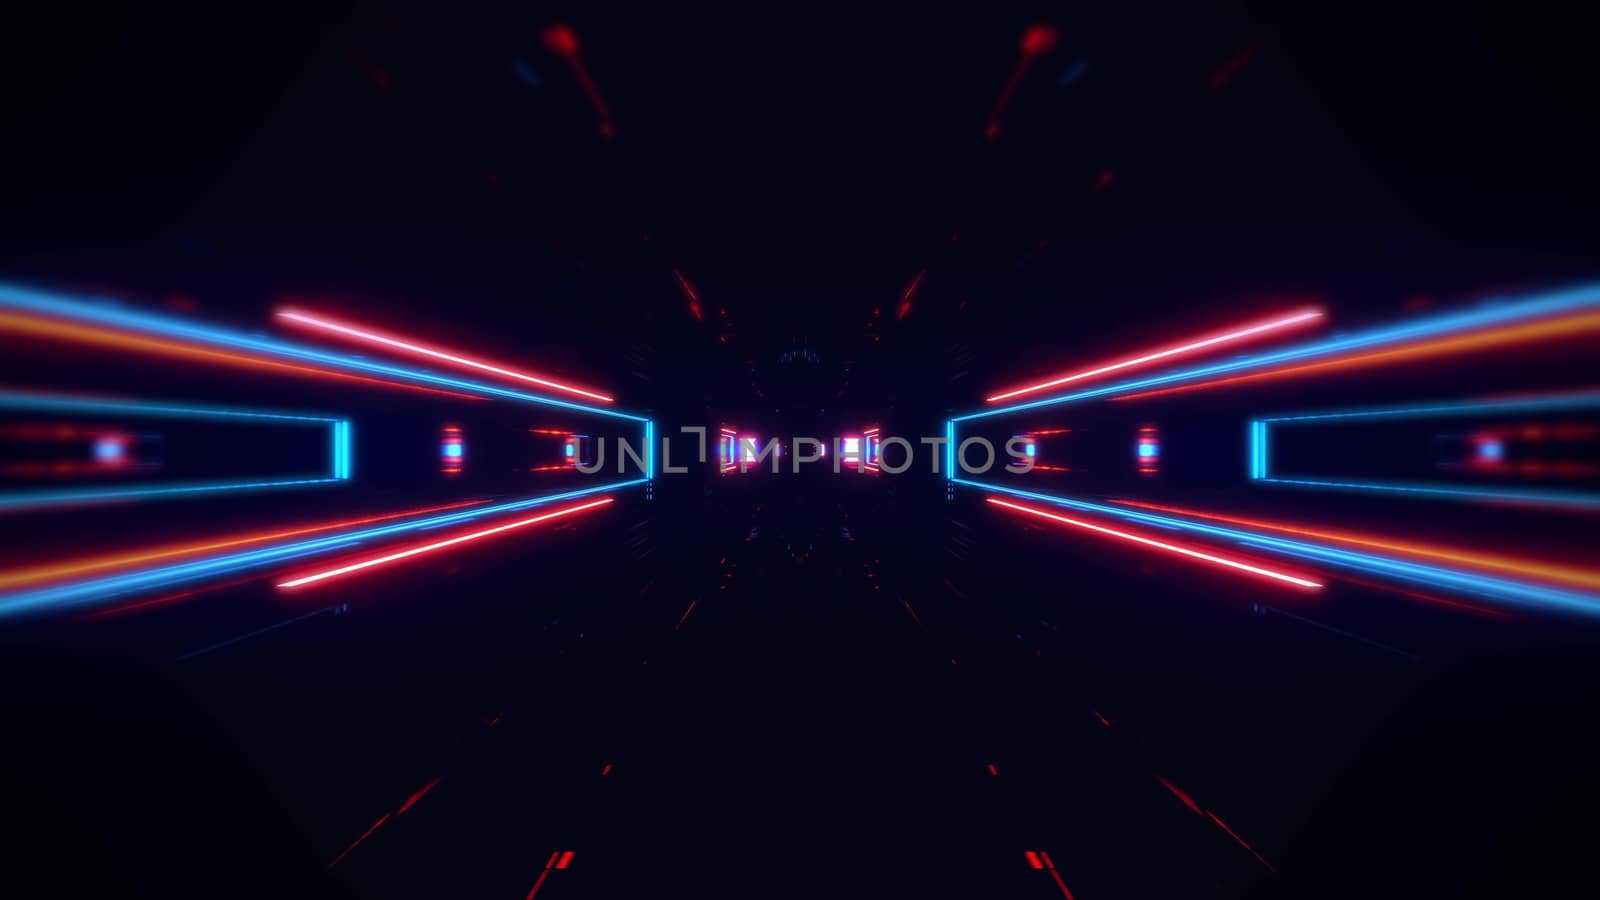 futuristic science-fiction lights glowing tunnel corridor 3d illustration background by tunnelmotions